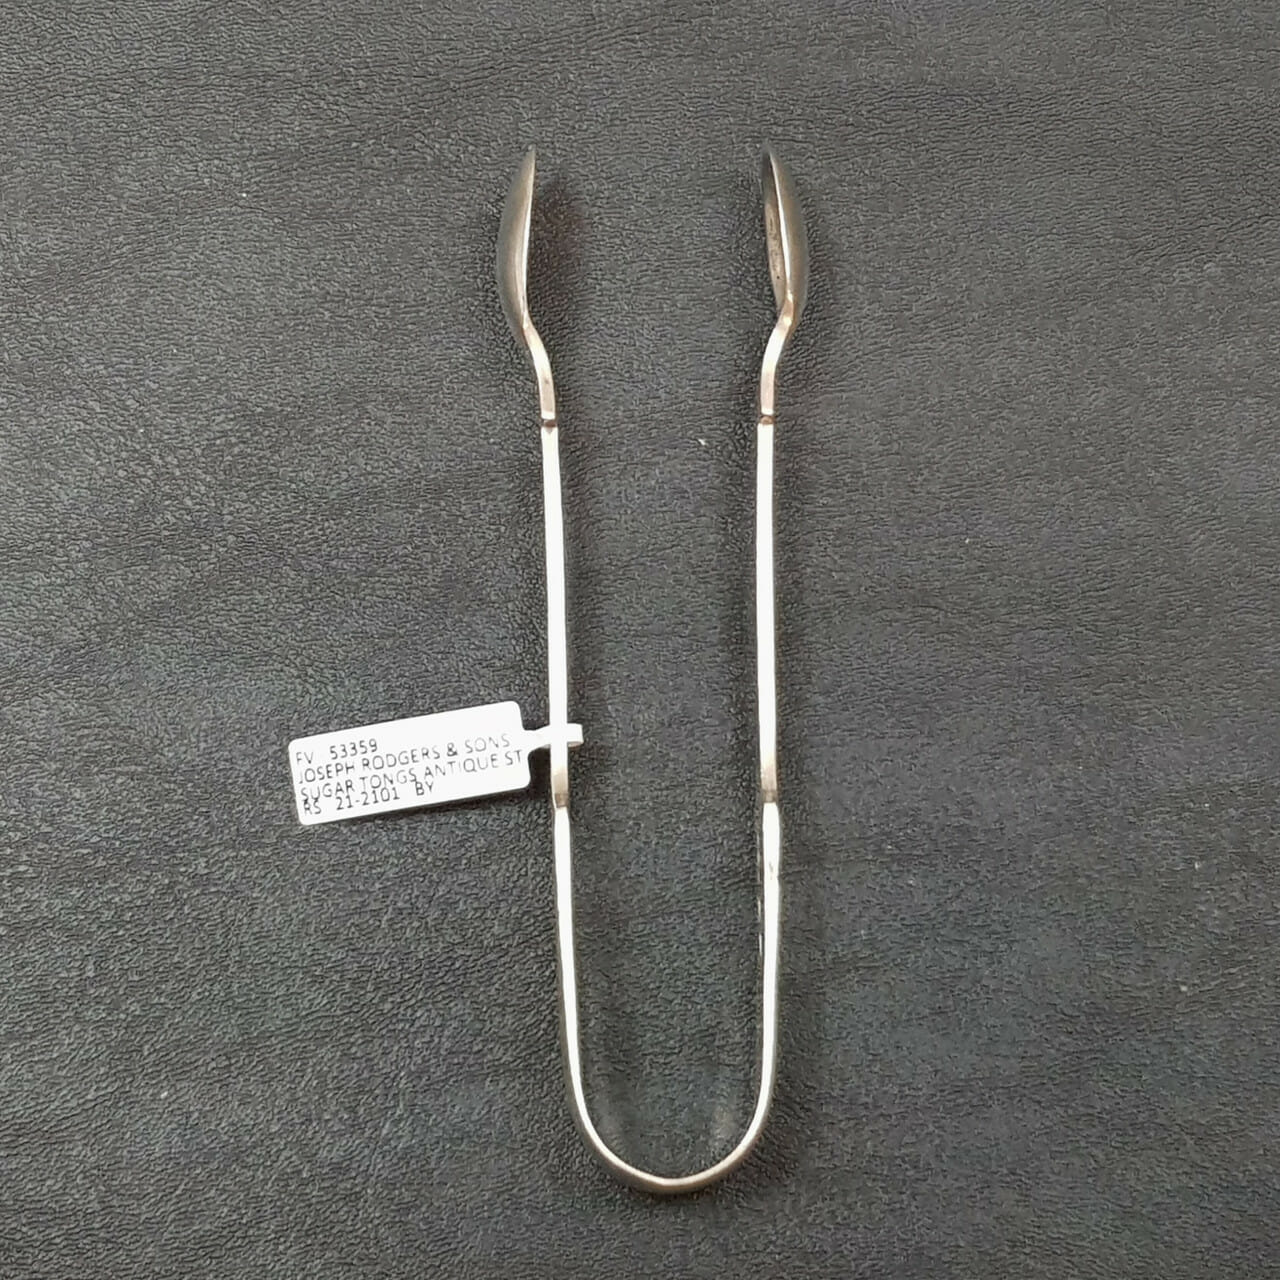 Antique Sterling Silver Joseph Rodgers & Sons Sugar Tongs (Sheffield 1908) #53359